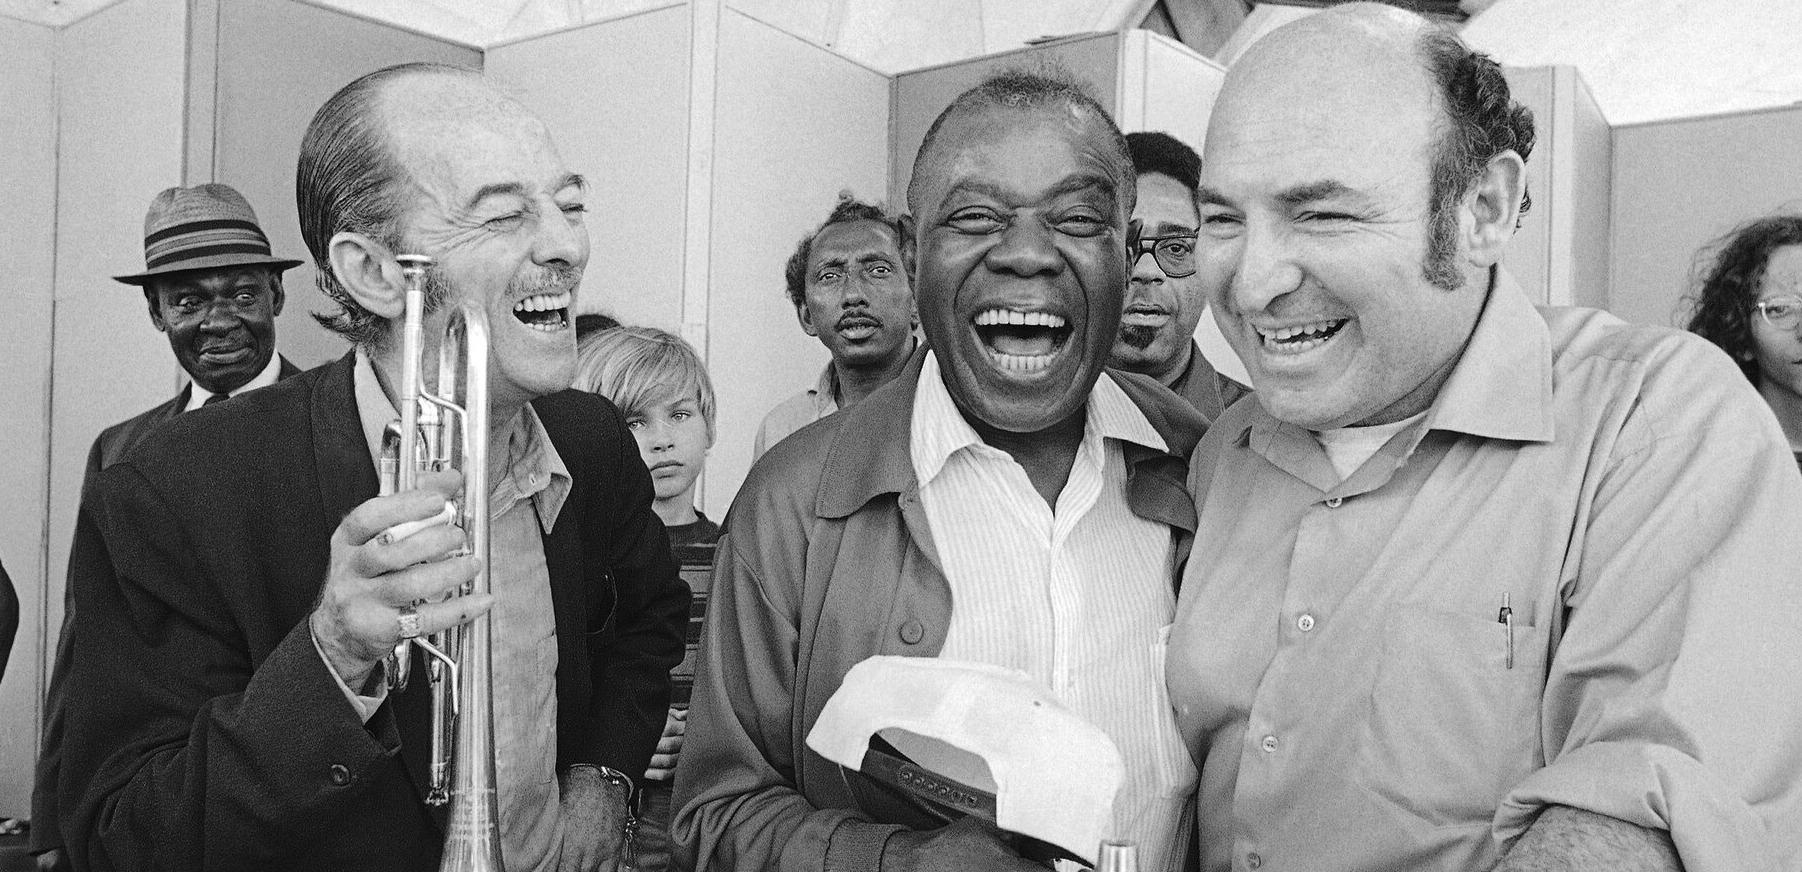 George Wein, right, with the trumpeter Bobby Hackett and Louis Armstrong at the Newport Jazz Festival in 1970. The festival, which Mr. Wein first presented in 1954, became a model for how to present music in the open air on a grand scale.Credit...J Walter Green/Associated Press